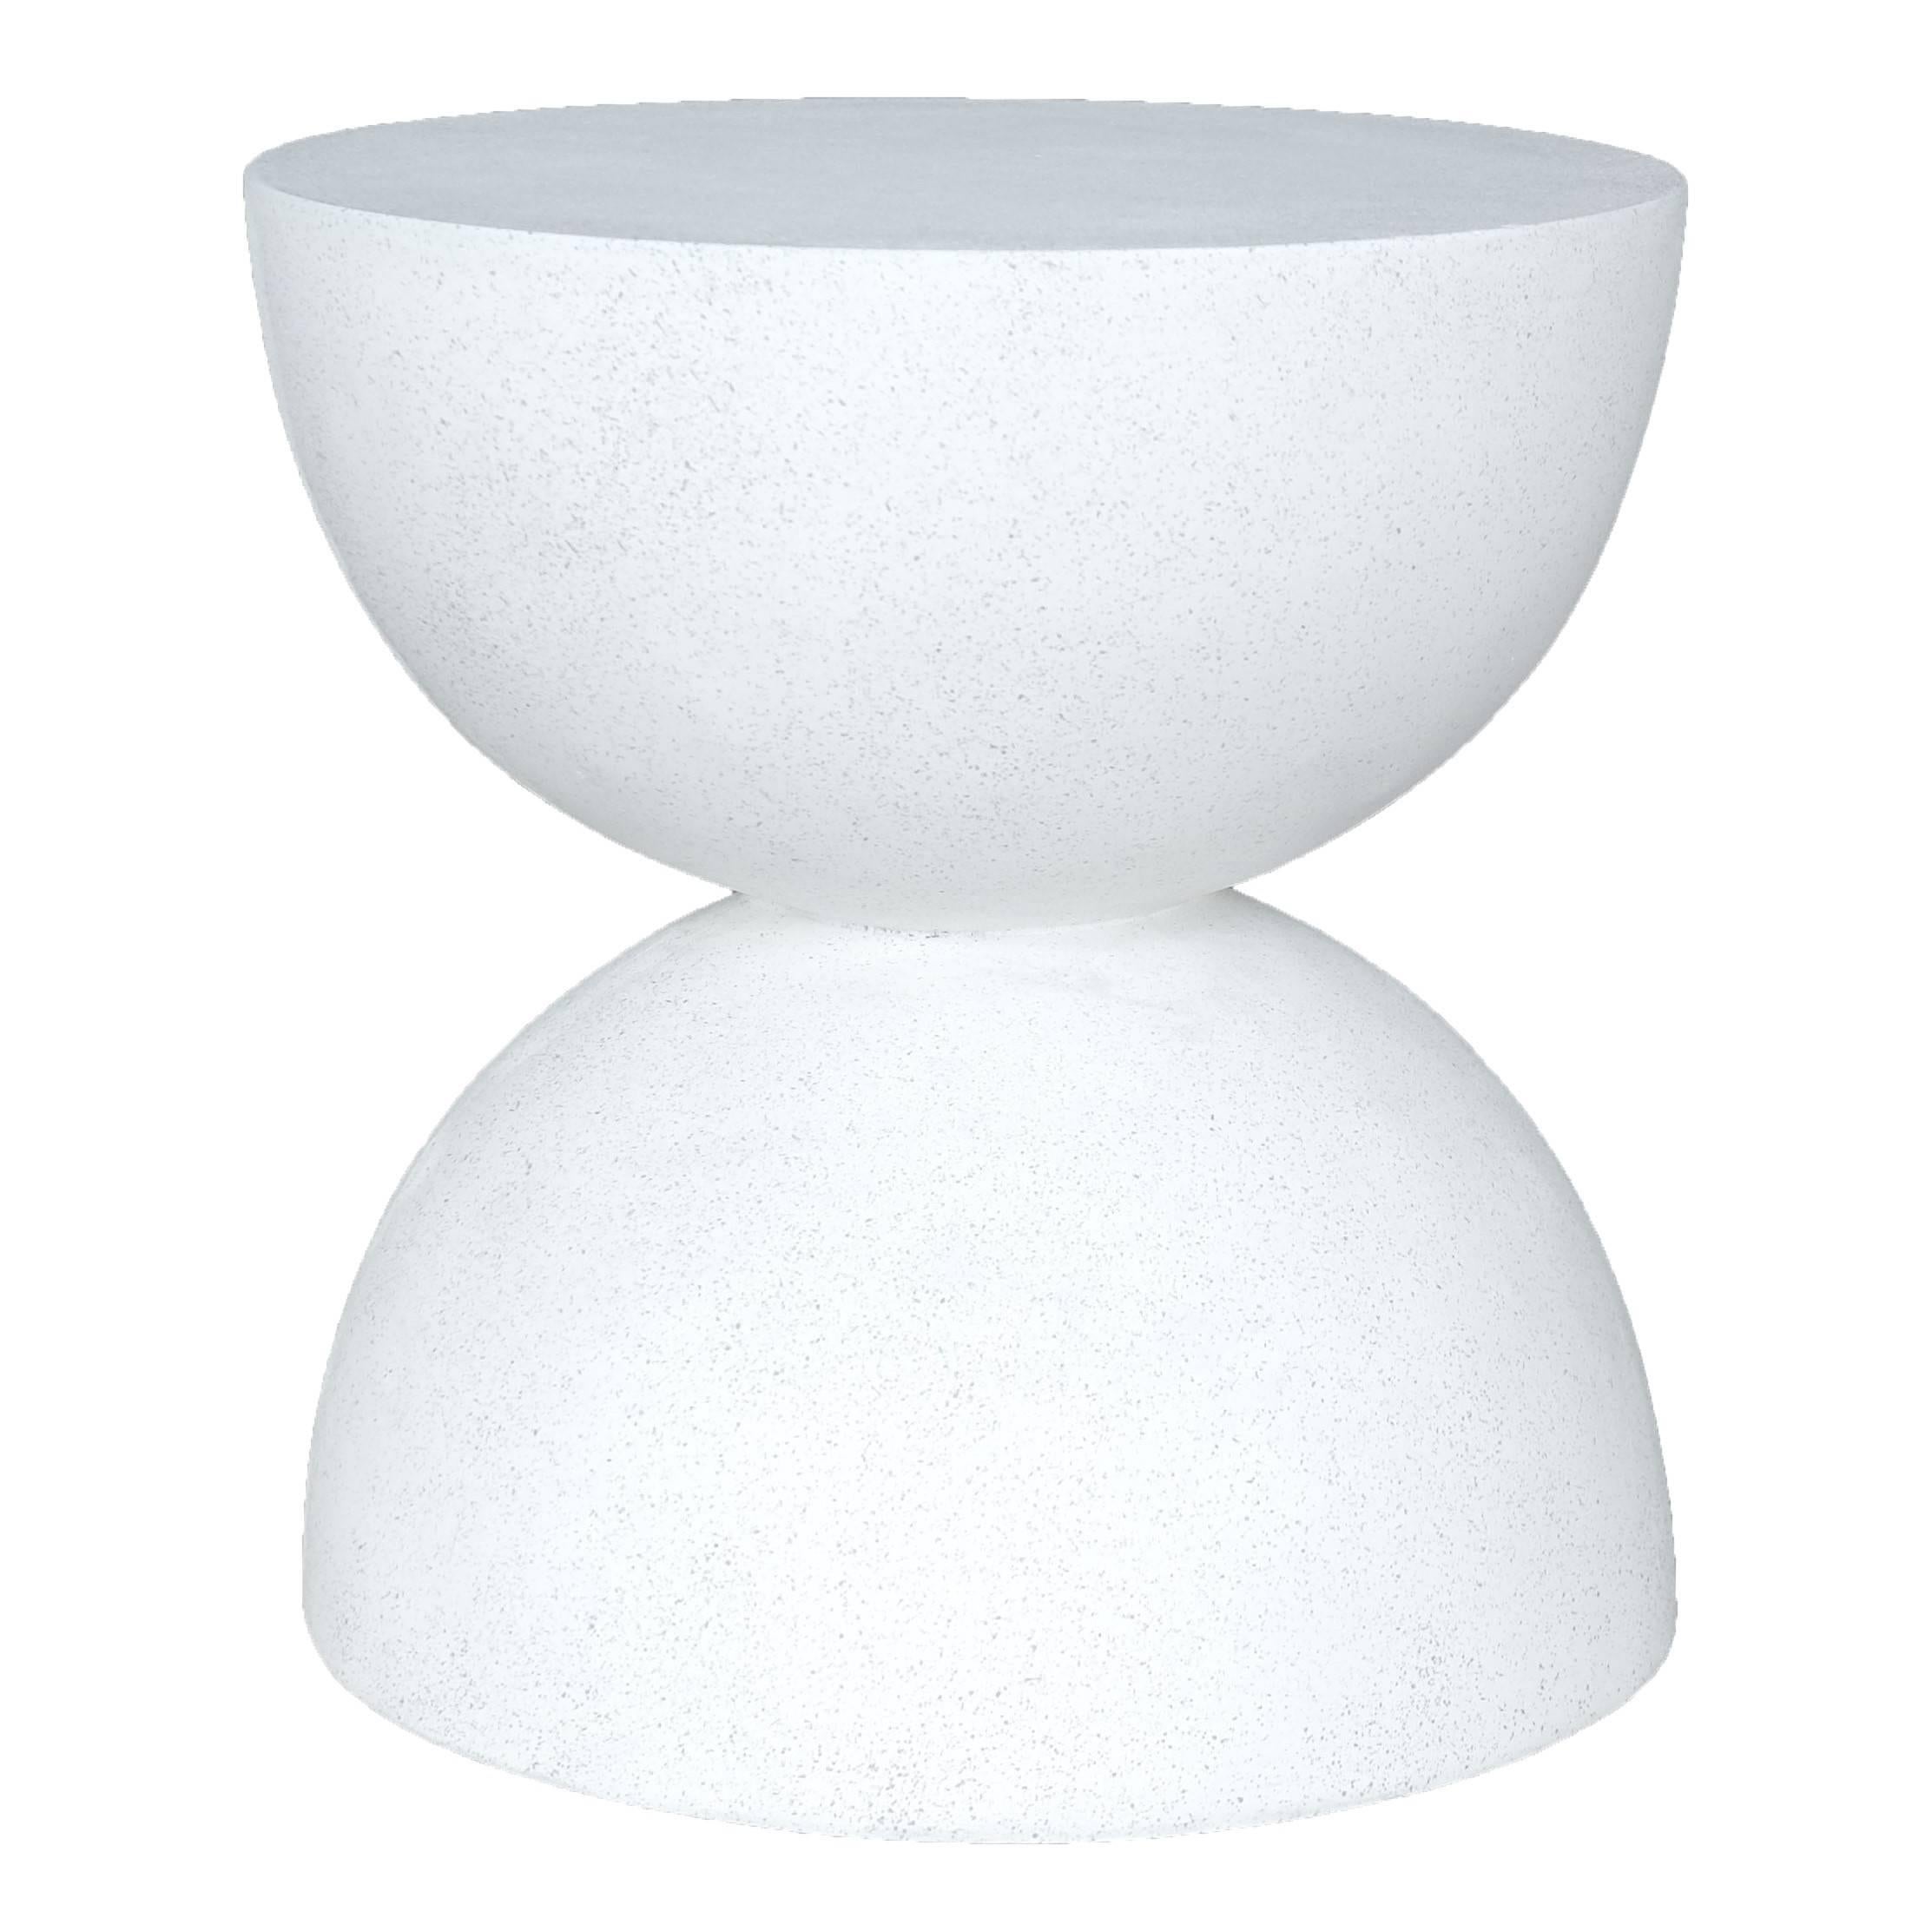 Cast Resin 'Bilbouquet' Side Table, White Stone Finish by Zachary A. Design For Sale